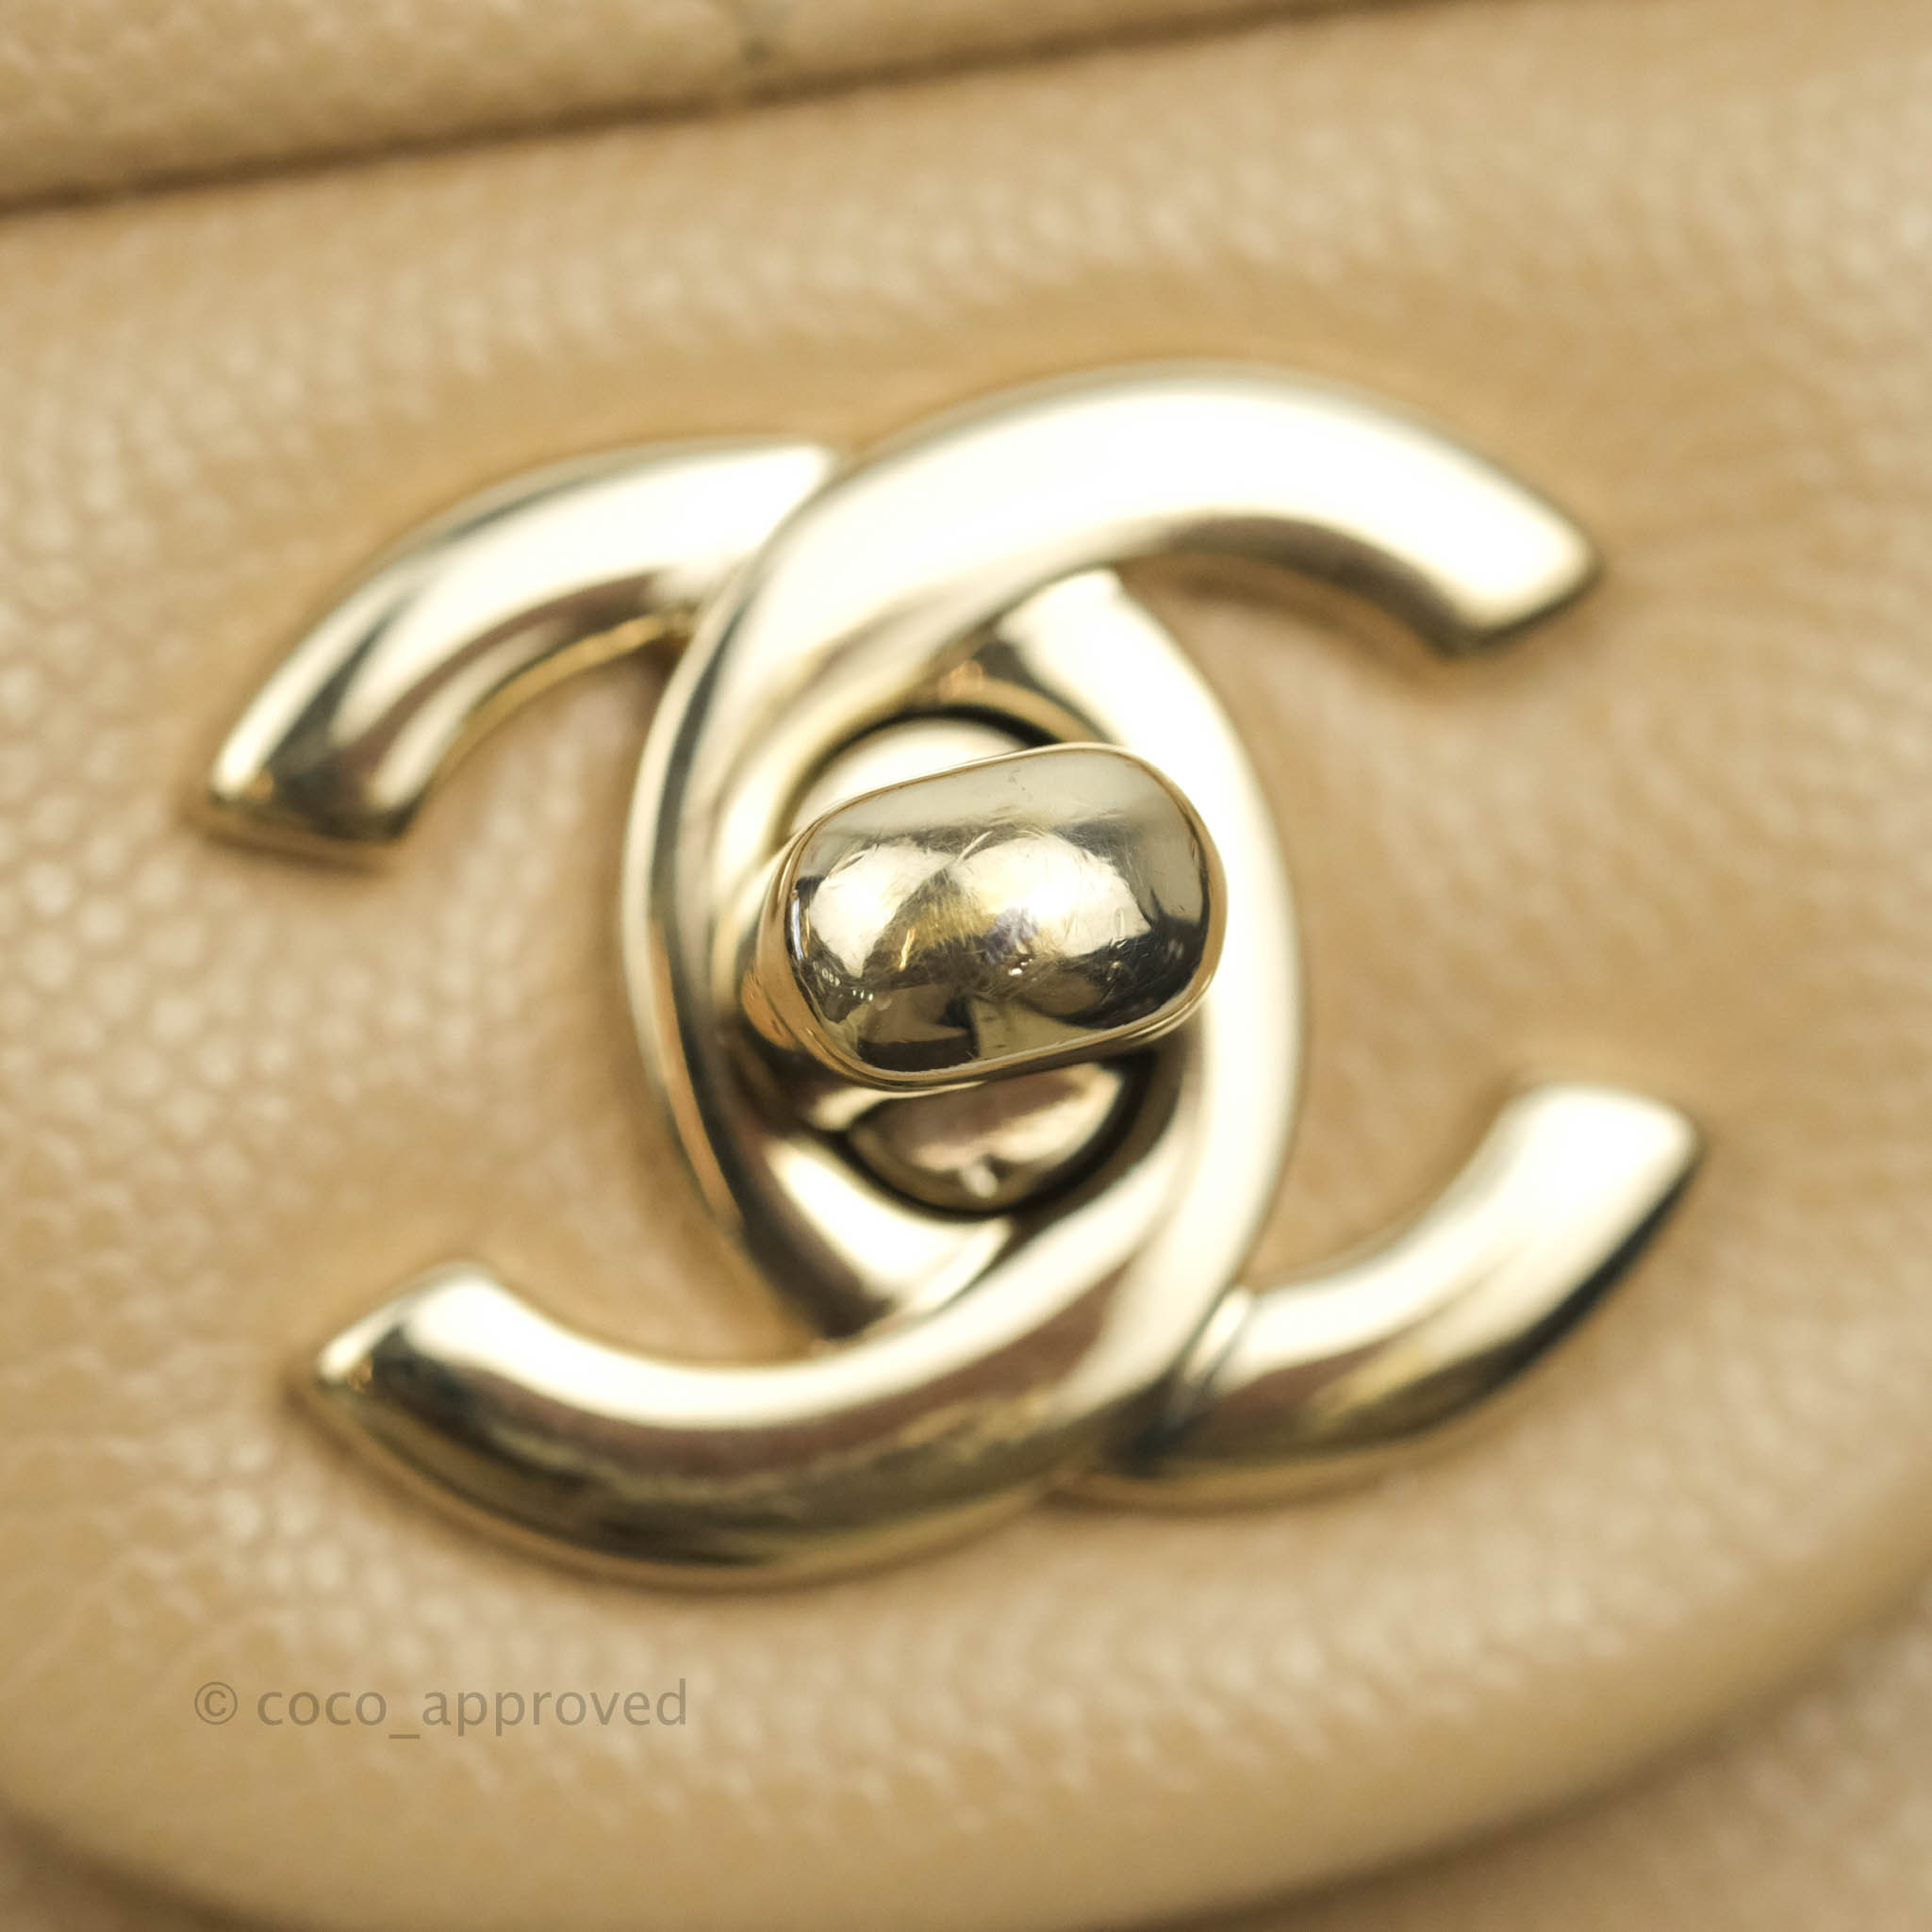 Chanel Quilted M/L Medium Double Flap Beige Caviar Gold Hardware 19C